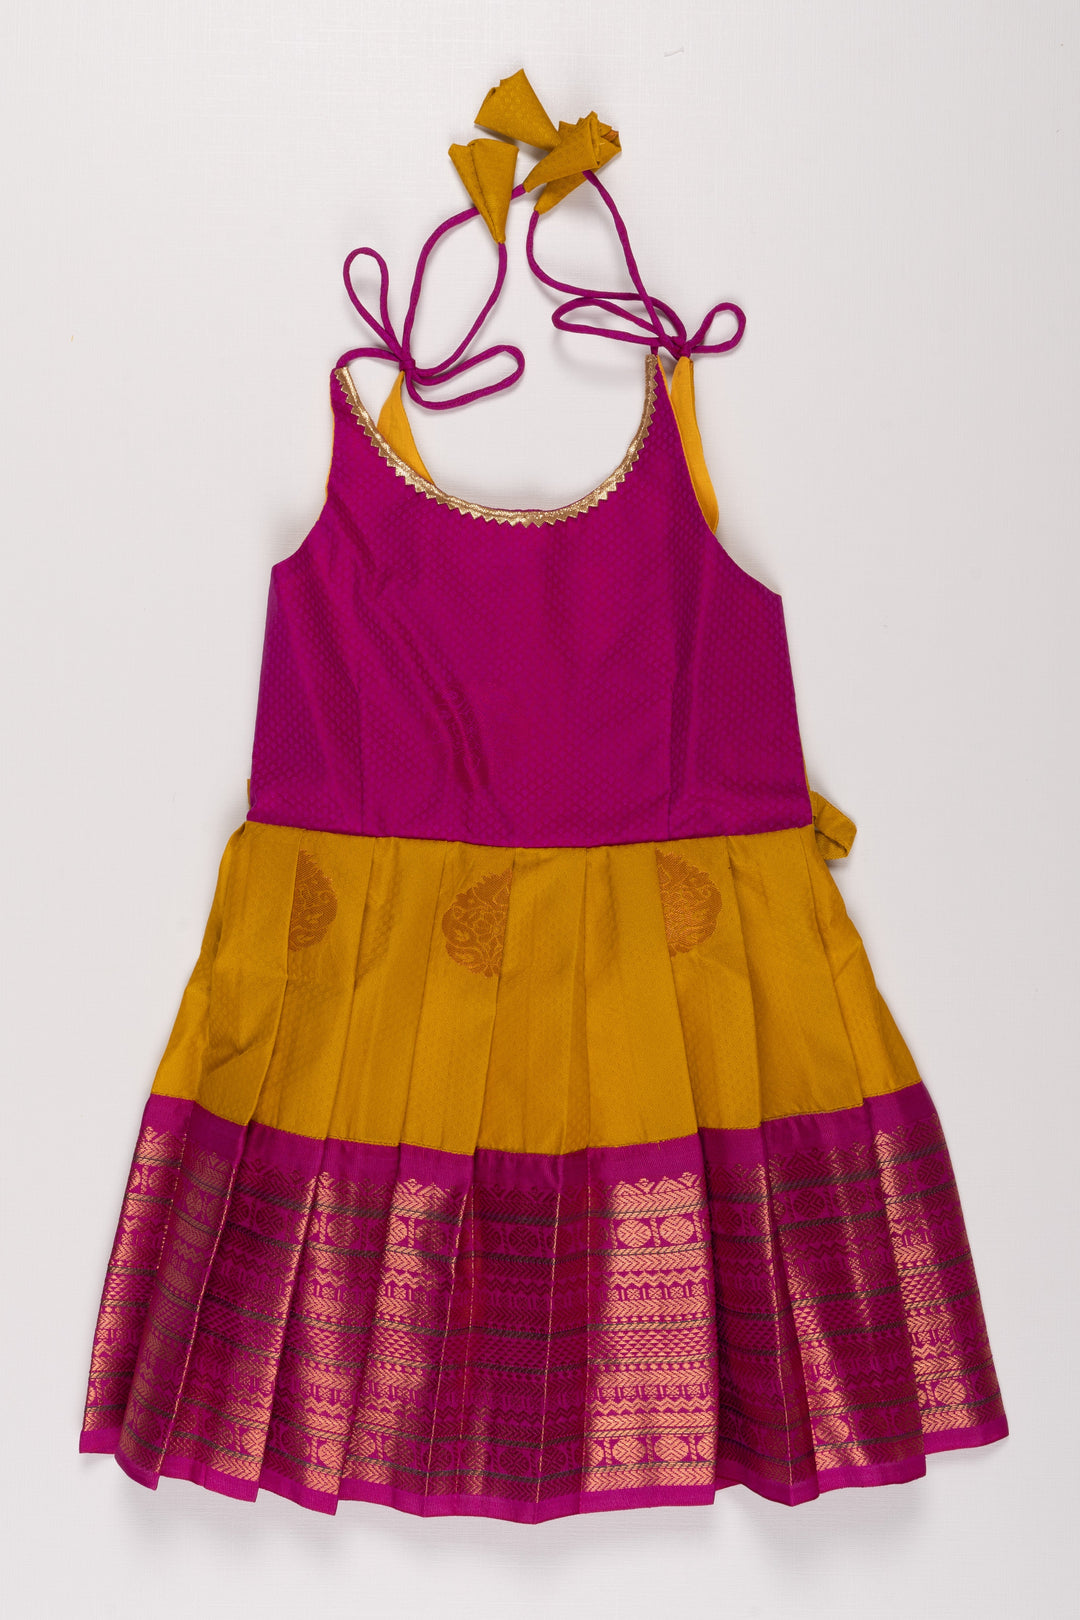 The Nesavu Tie Up Frock Elegant Magenta and Yellow Silk Blend TieUp Frock with Intricate Gold Border Detailing Nesavu 16 (1Y) / Yellow / Style 3 T338C-16 Magenta and Yellow Silk Frock | Ethnic Party Dress with Gold Detailing | The Nesavu